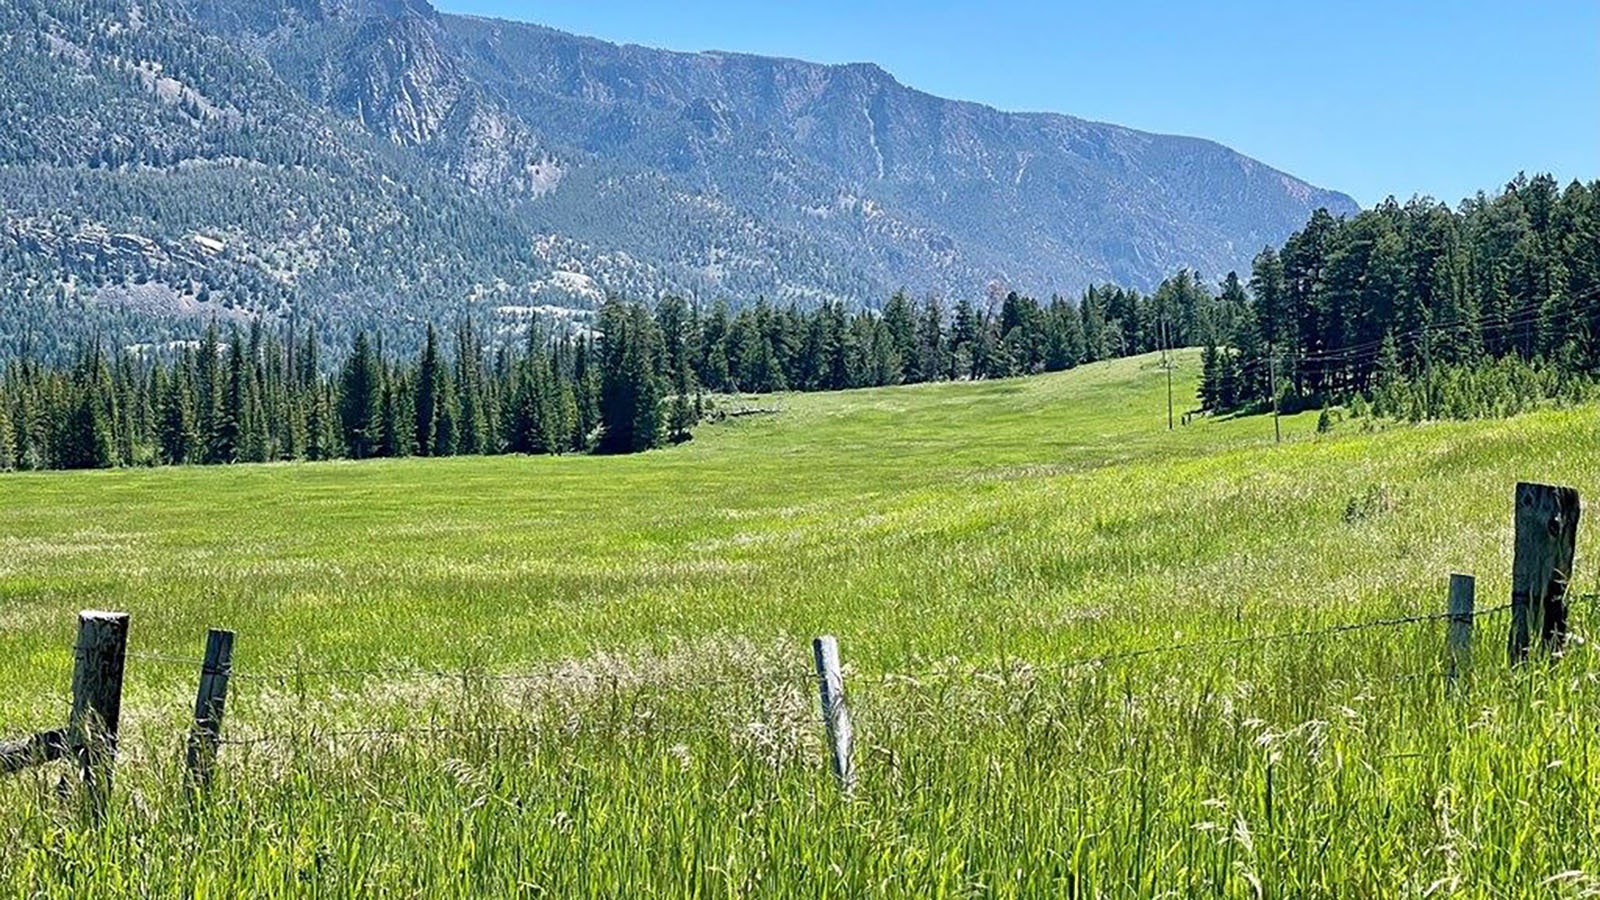 Richard Realty has listed a 63-acre property an hour’s drive from Cody along the Chief Joseph Scenic Highway for $13.5 million.